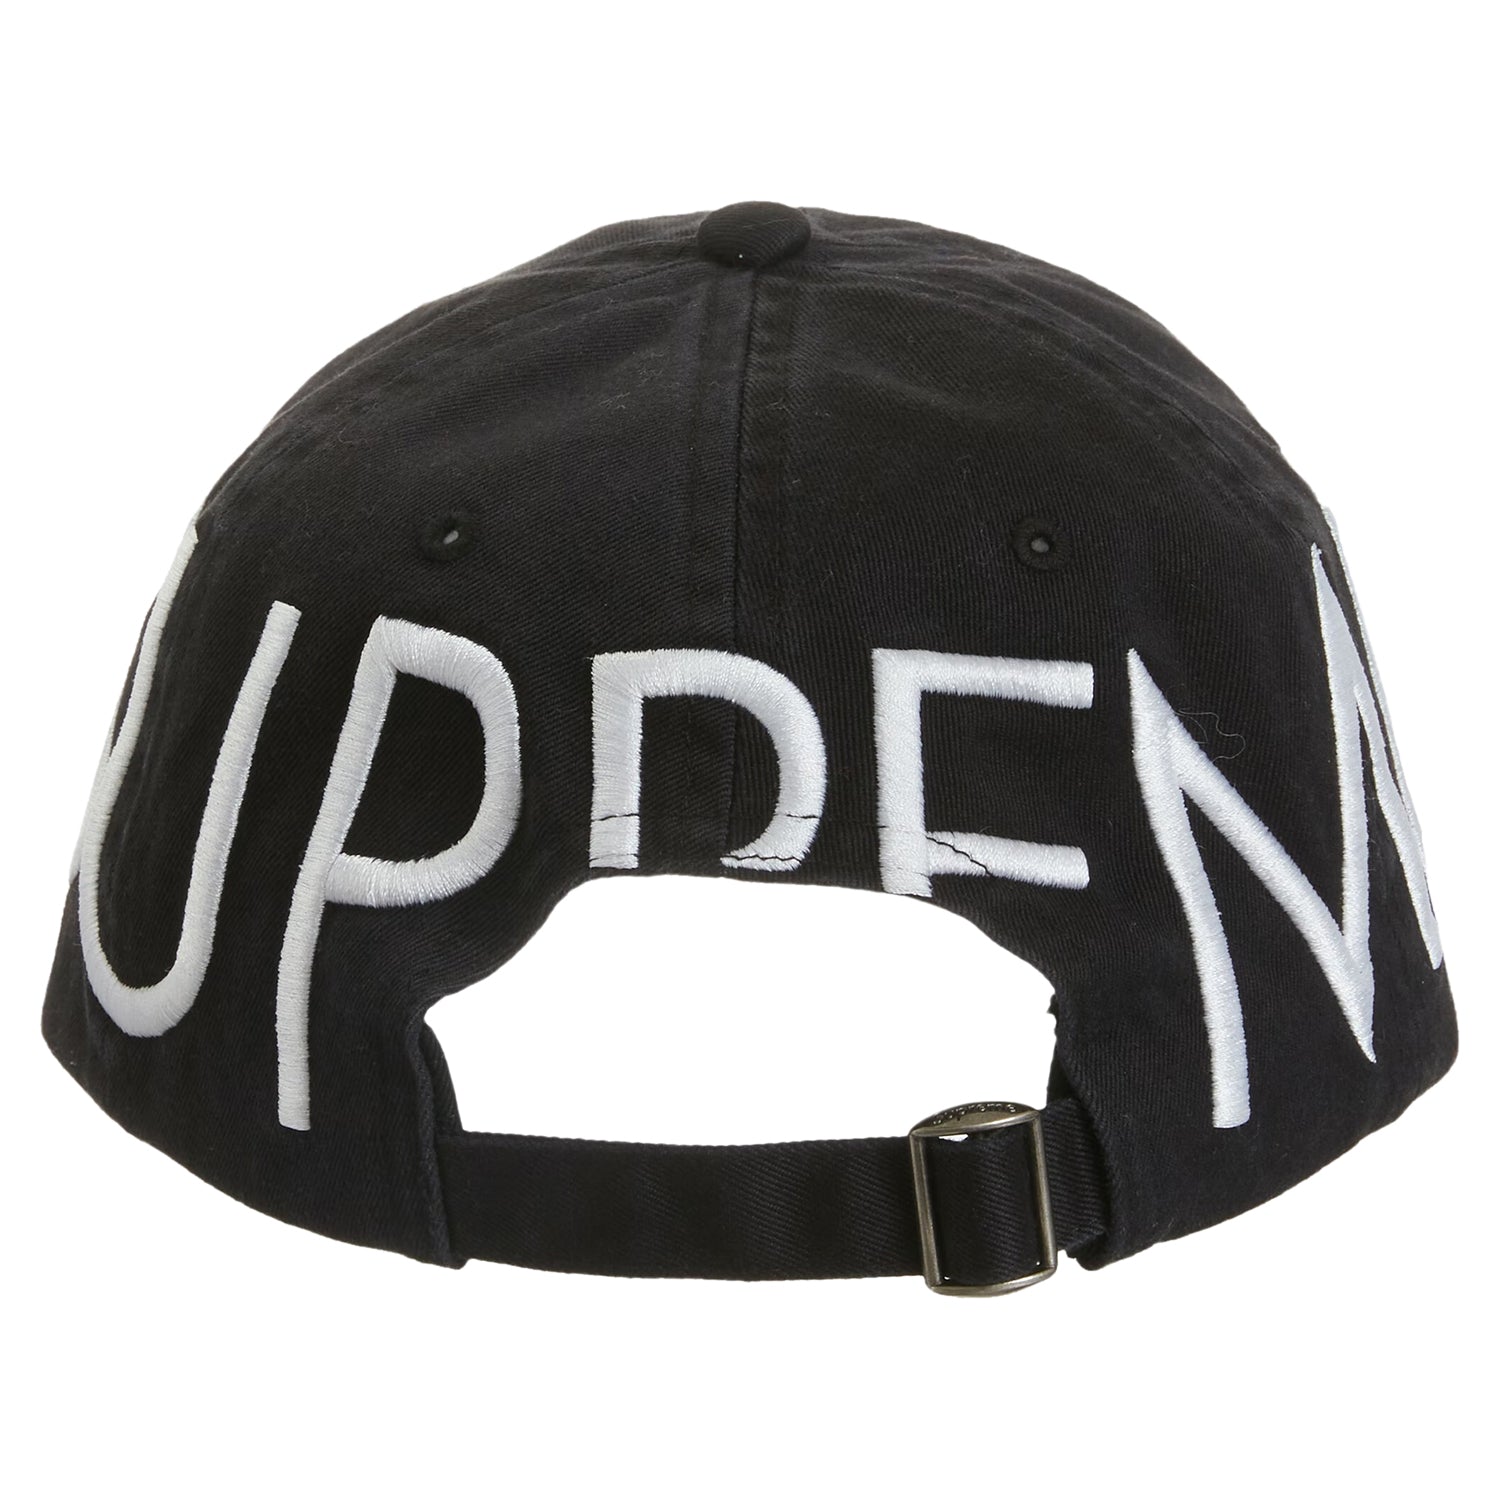 Supreme Spread 6-panel Hat Unisex Style : Ss22h62